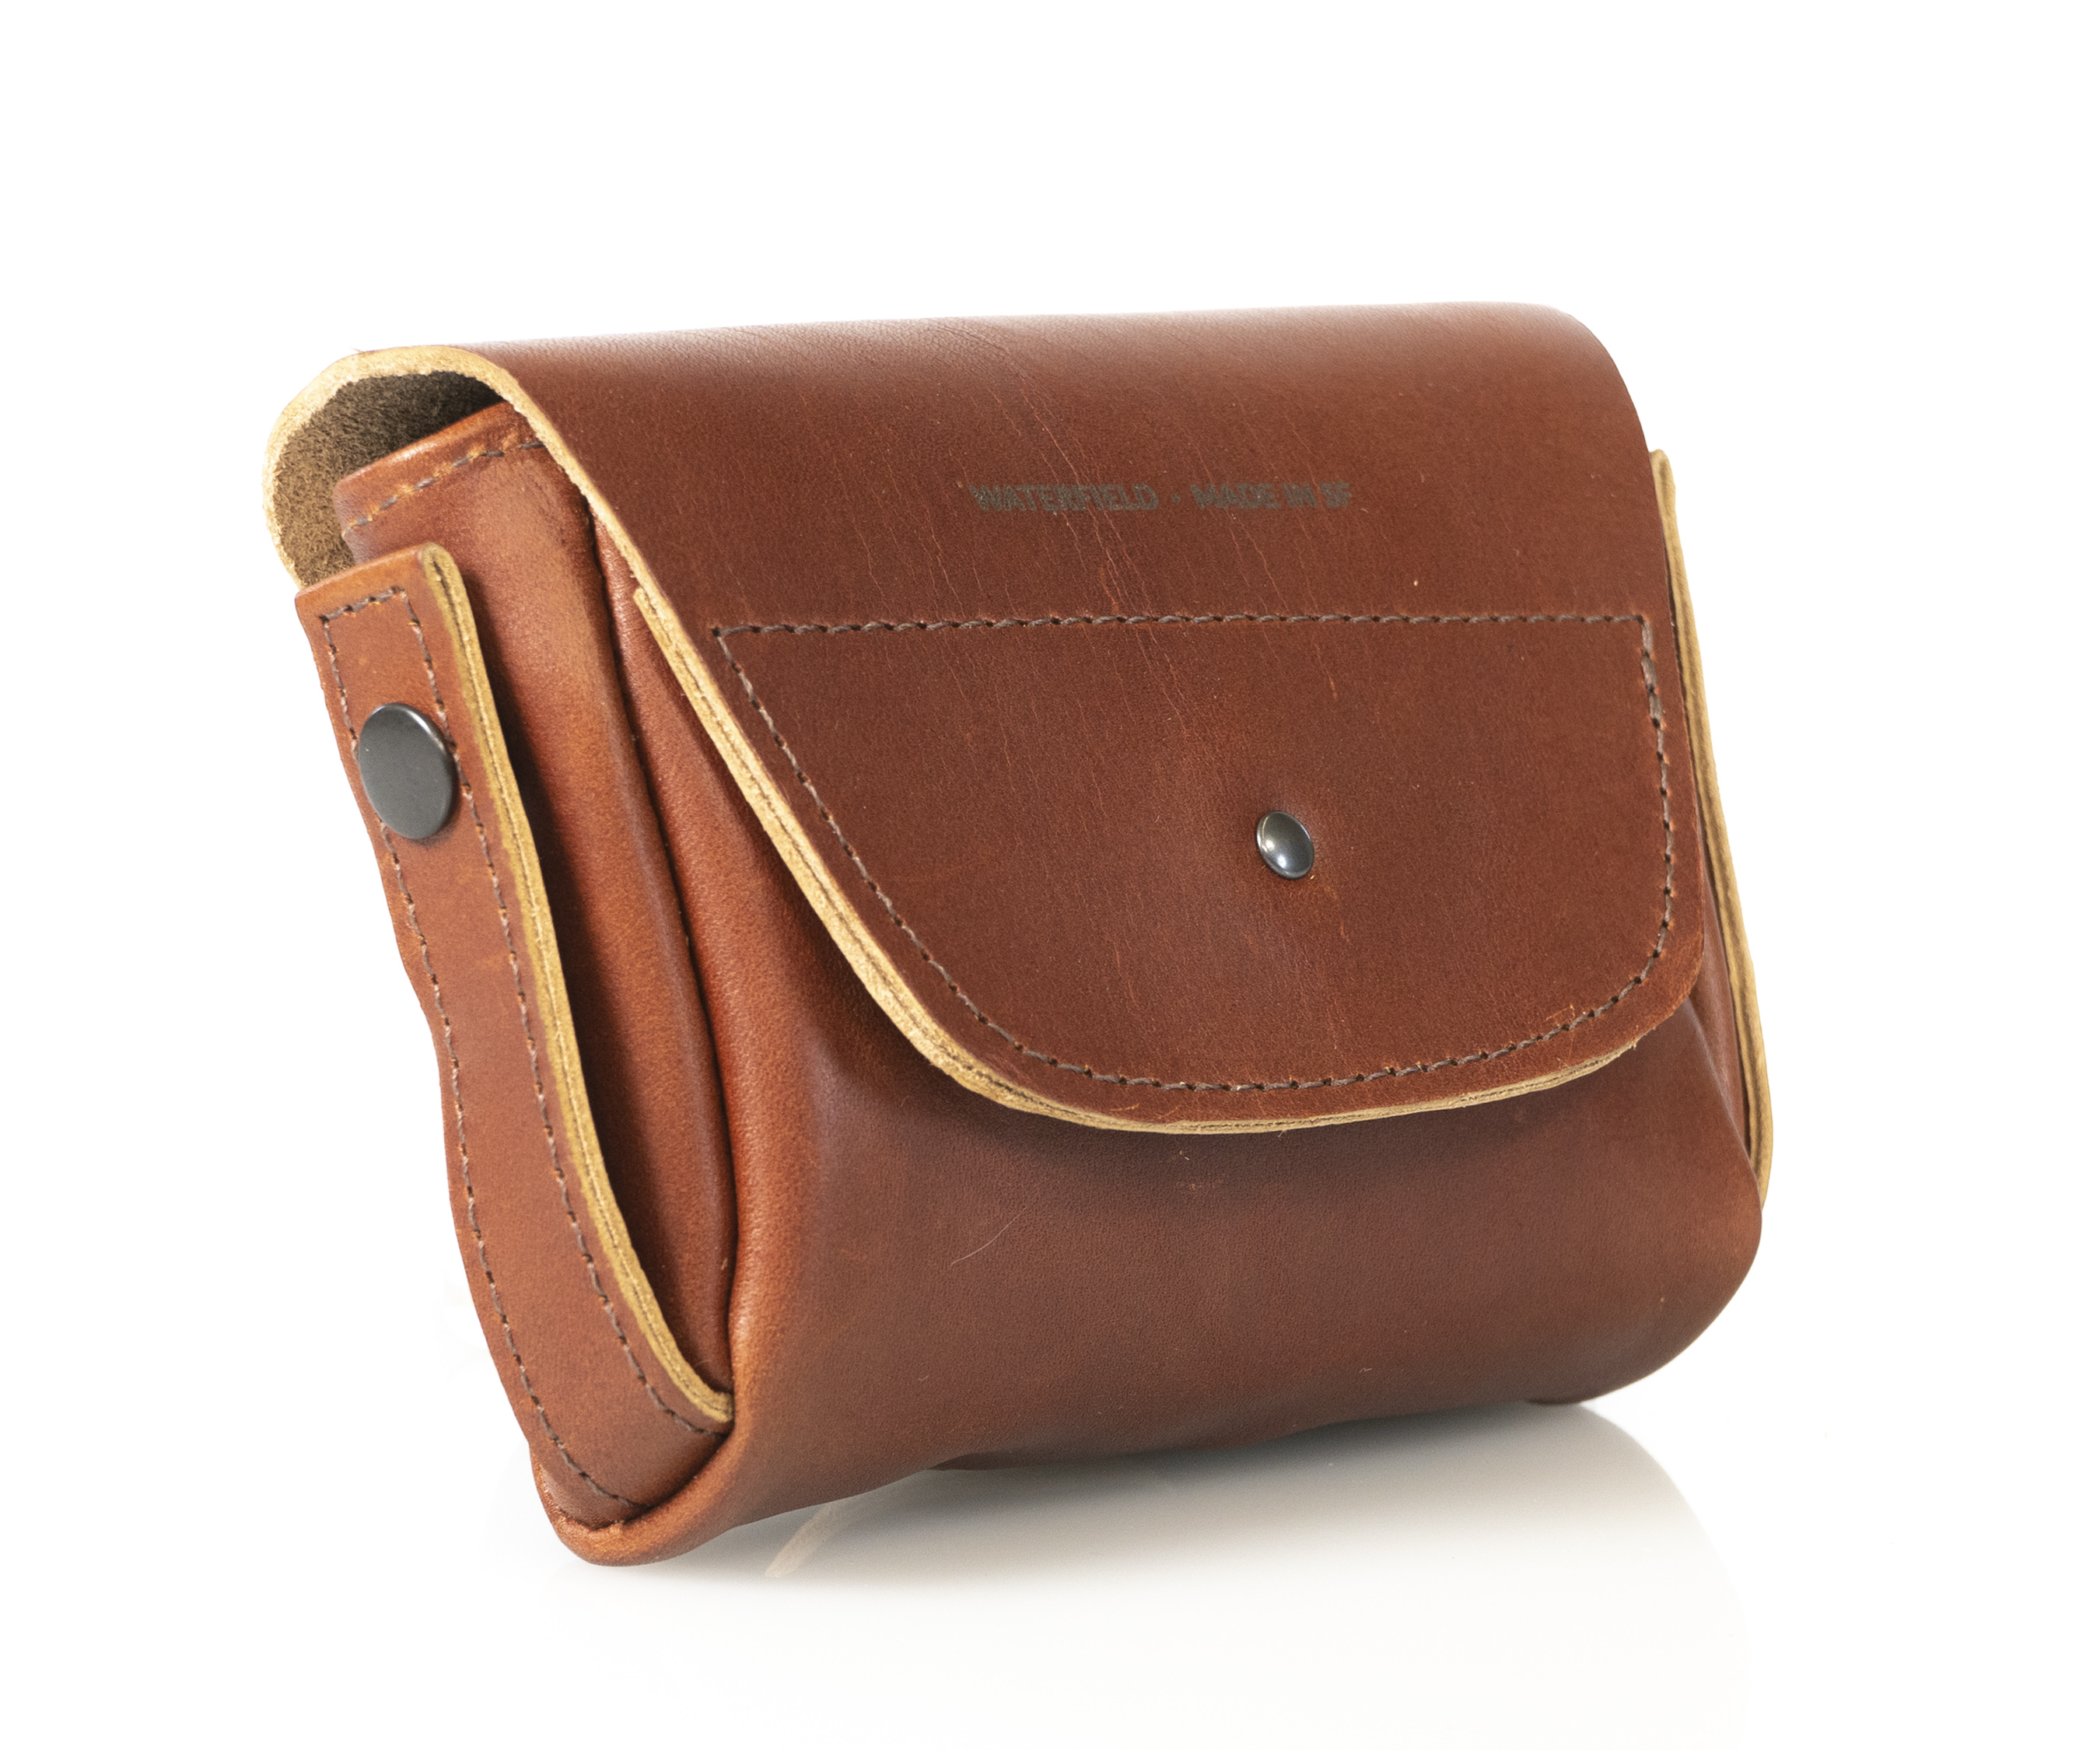 Wag Hip Pack in cognac leather